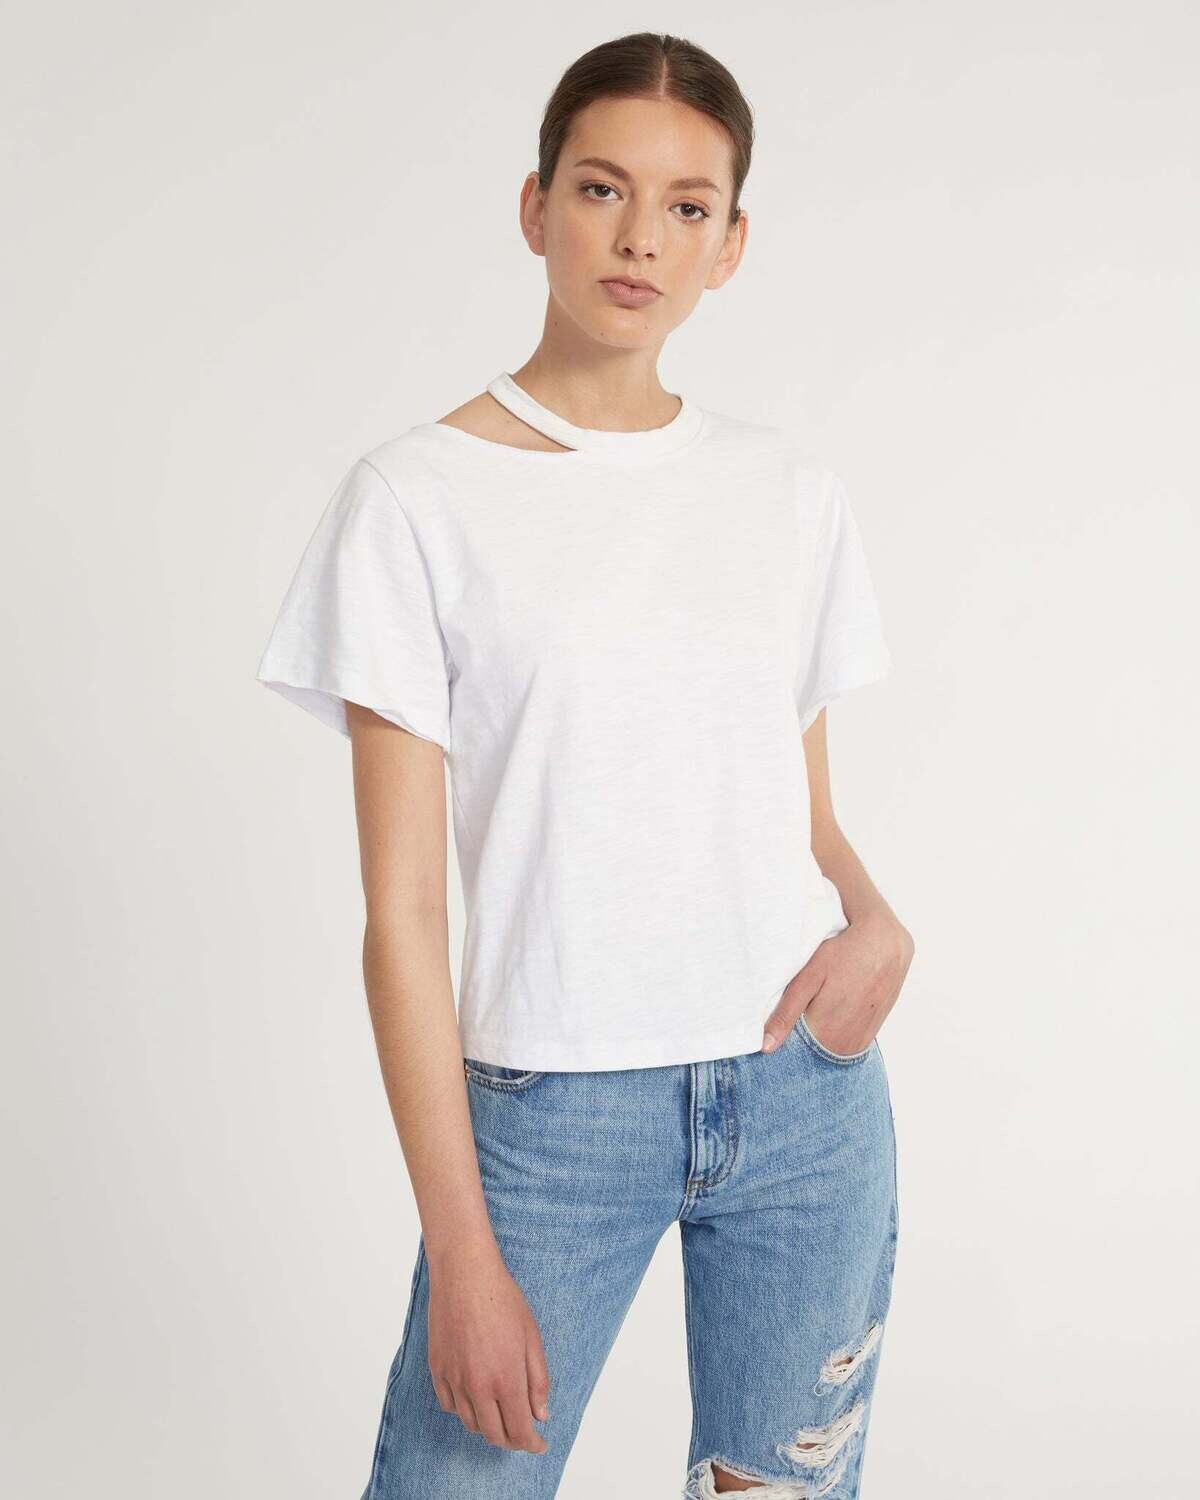 Marissa Webb Tate Cut Out Tee in White